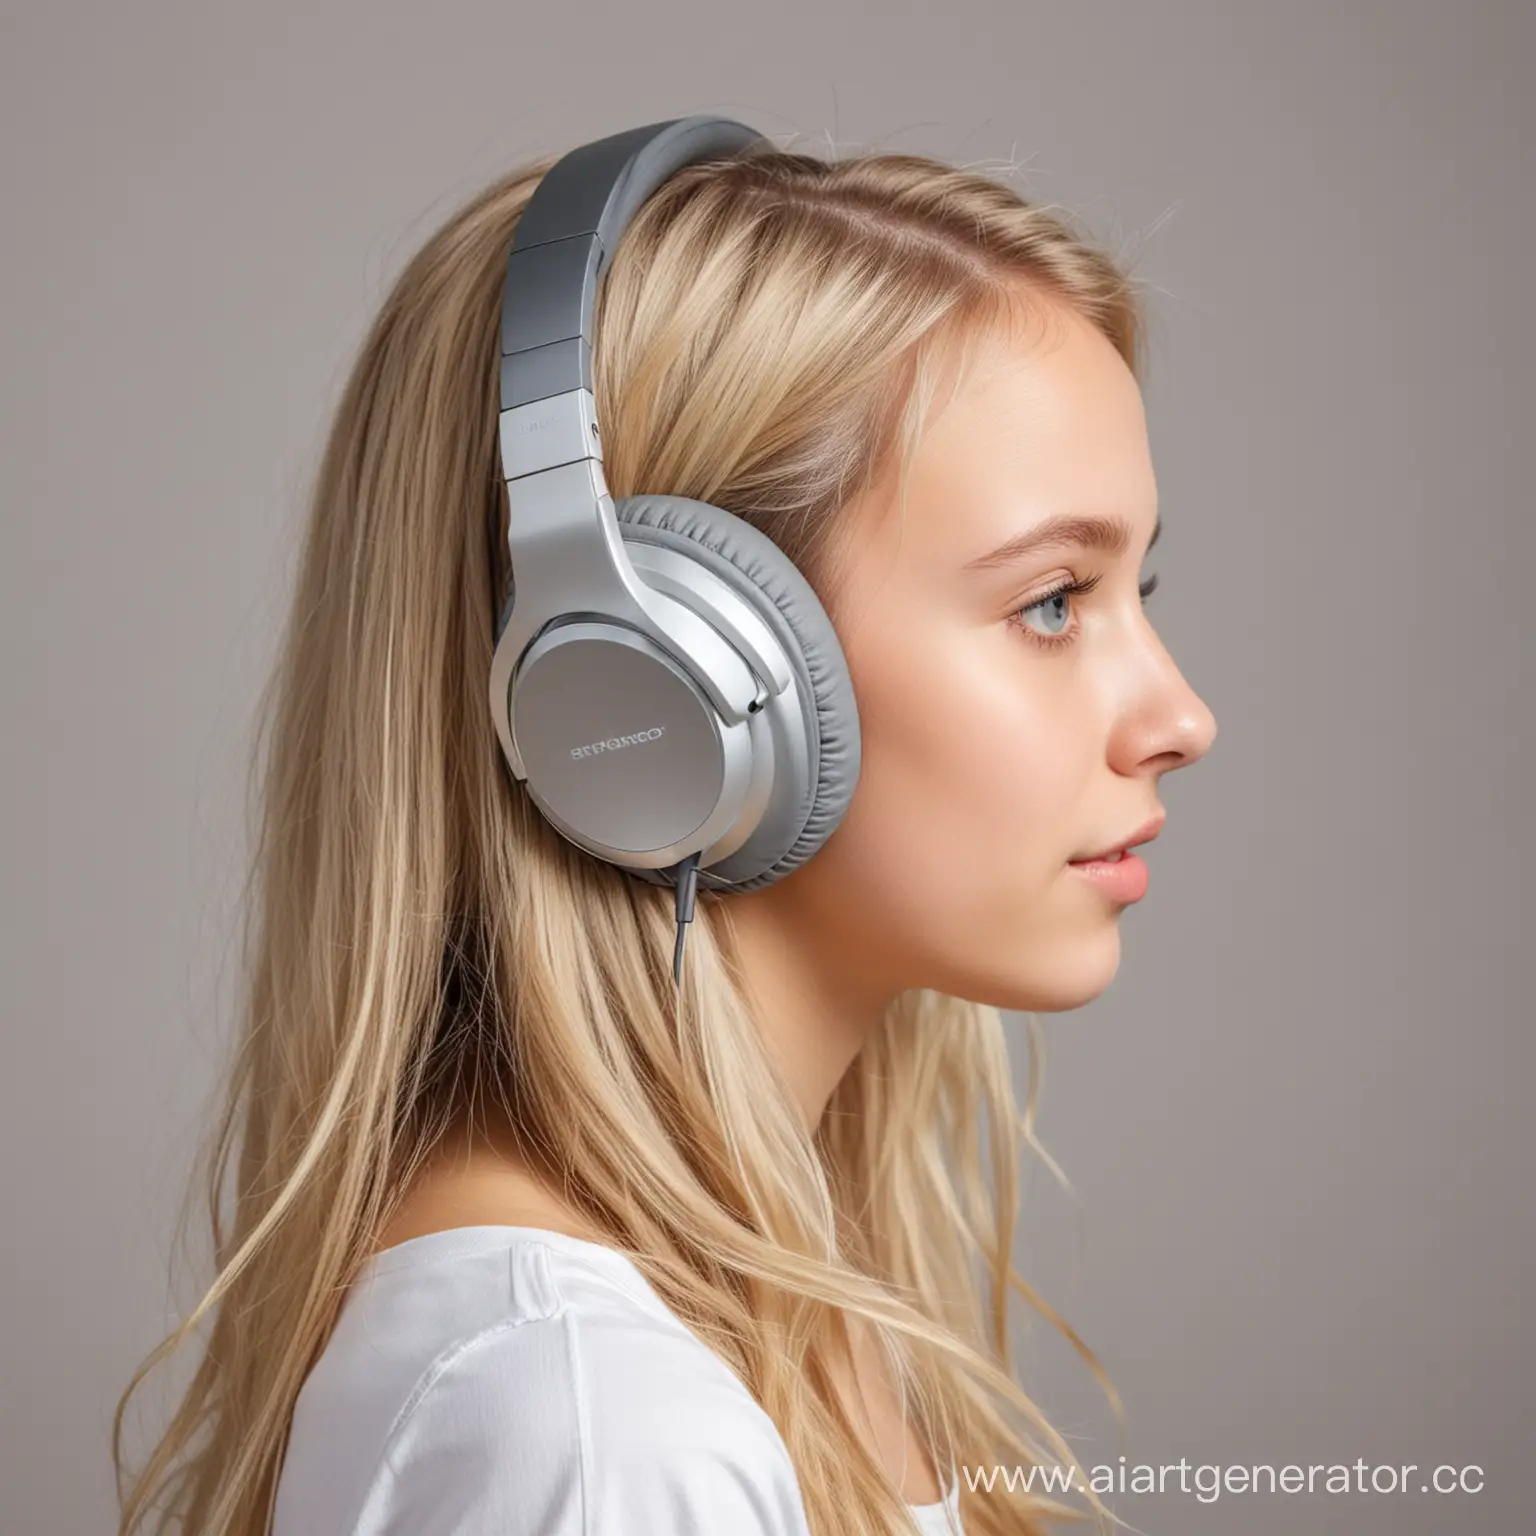 LightHaired-Young-Girl-Enjoying-Music-with-Headphones-in-Profile-Portrait